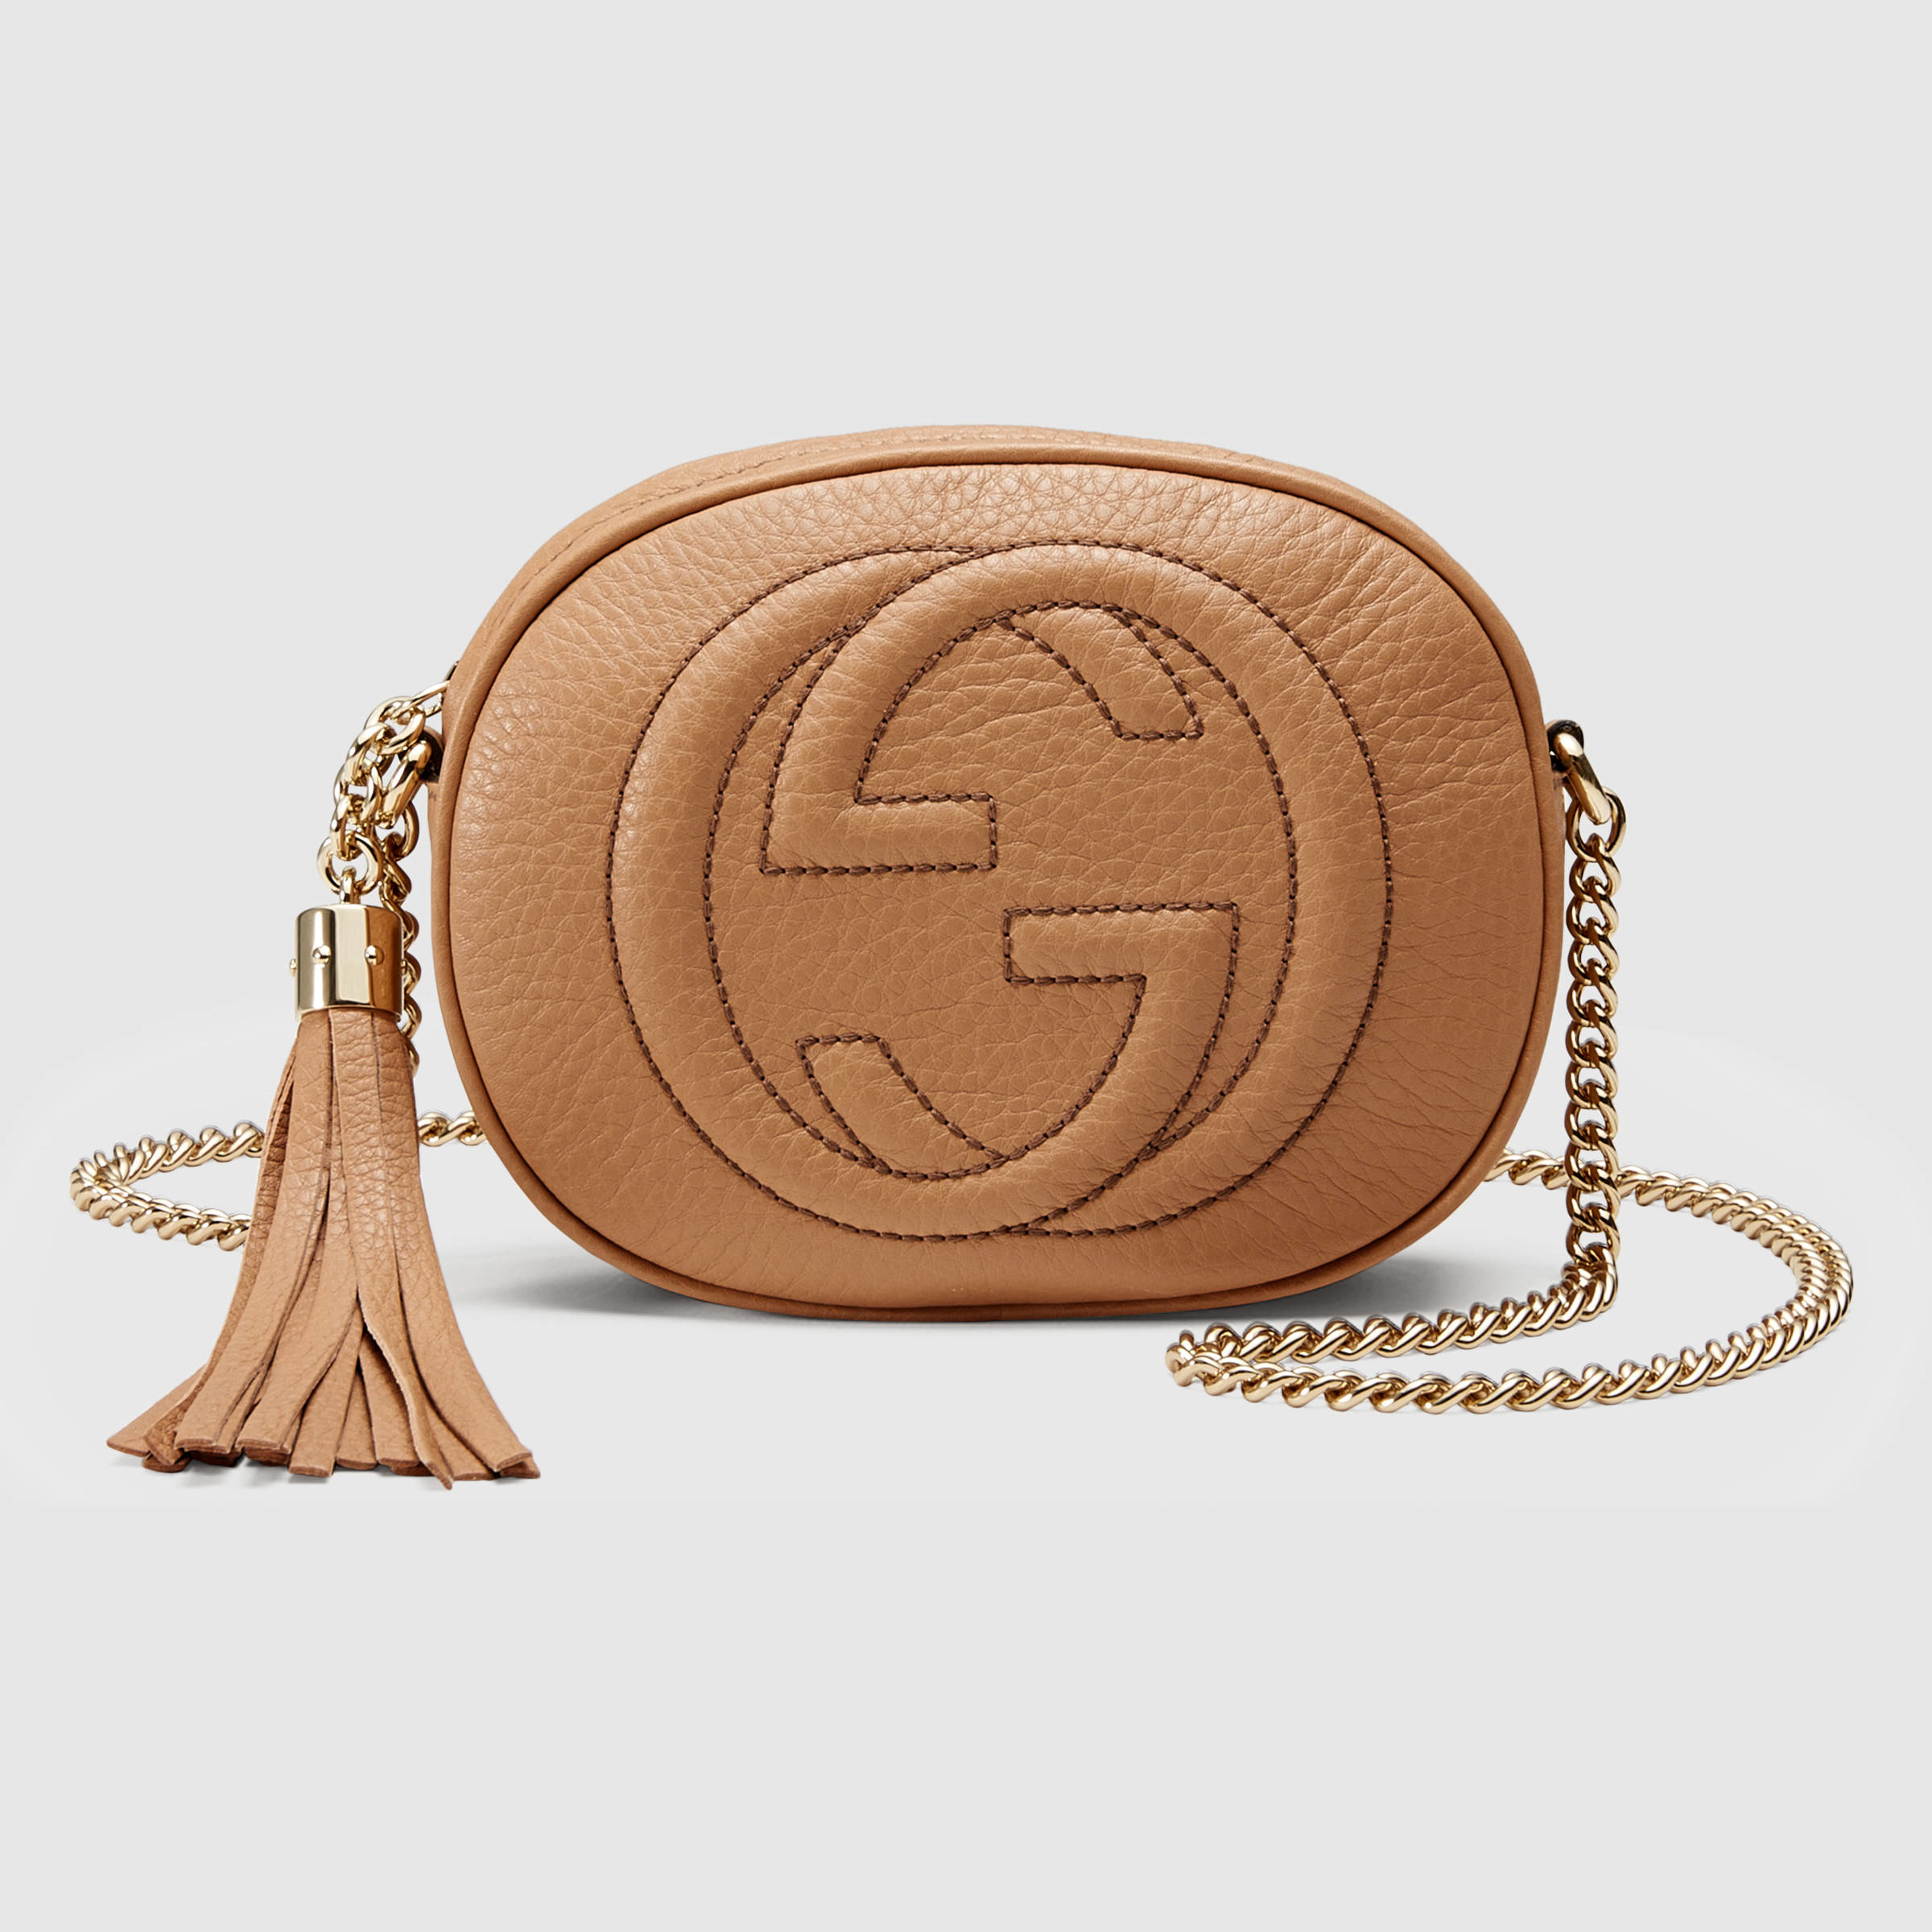 Lyst - Gucci Soho Leather Mini Chain Bag in Natural